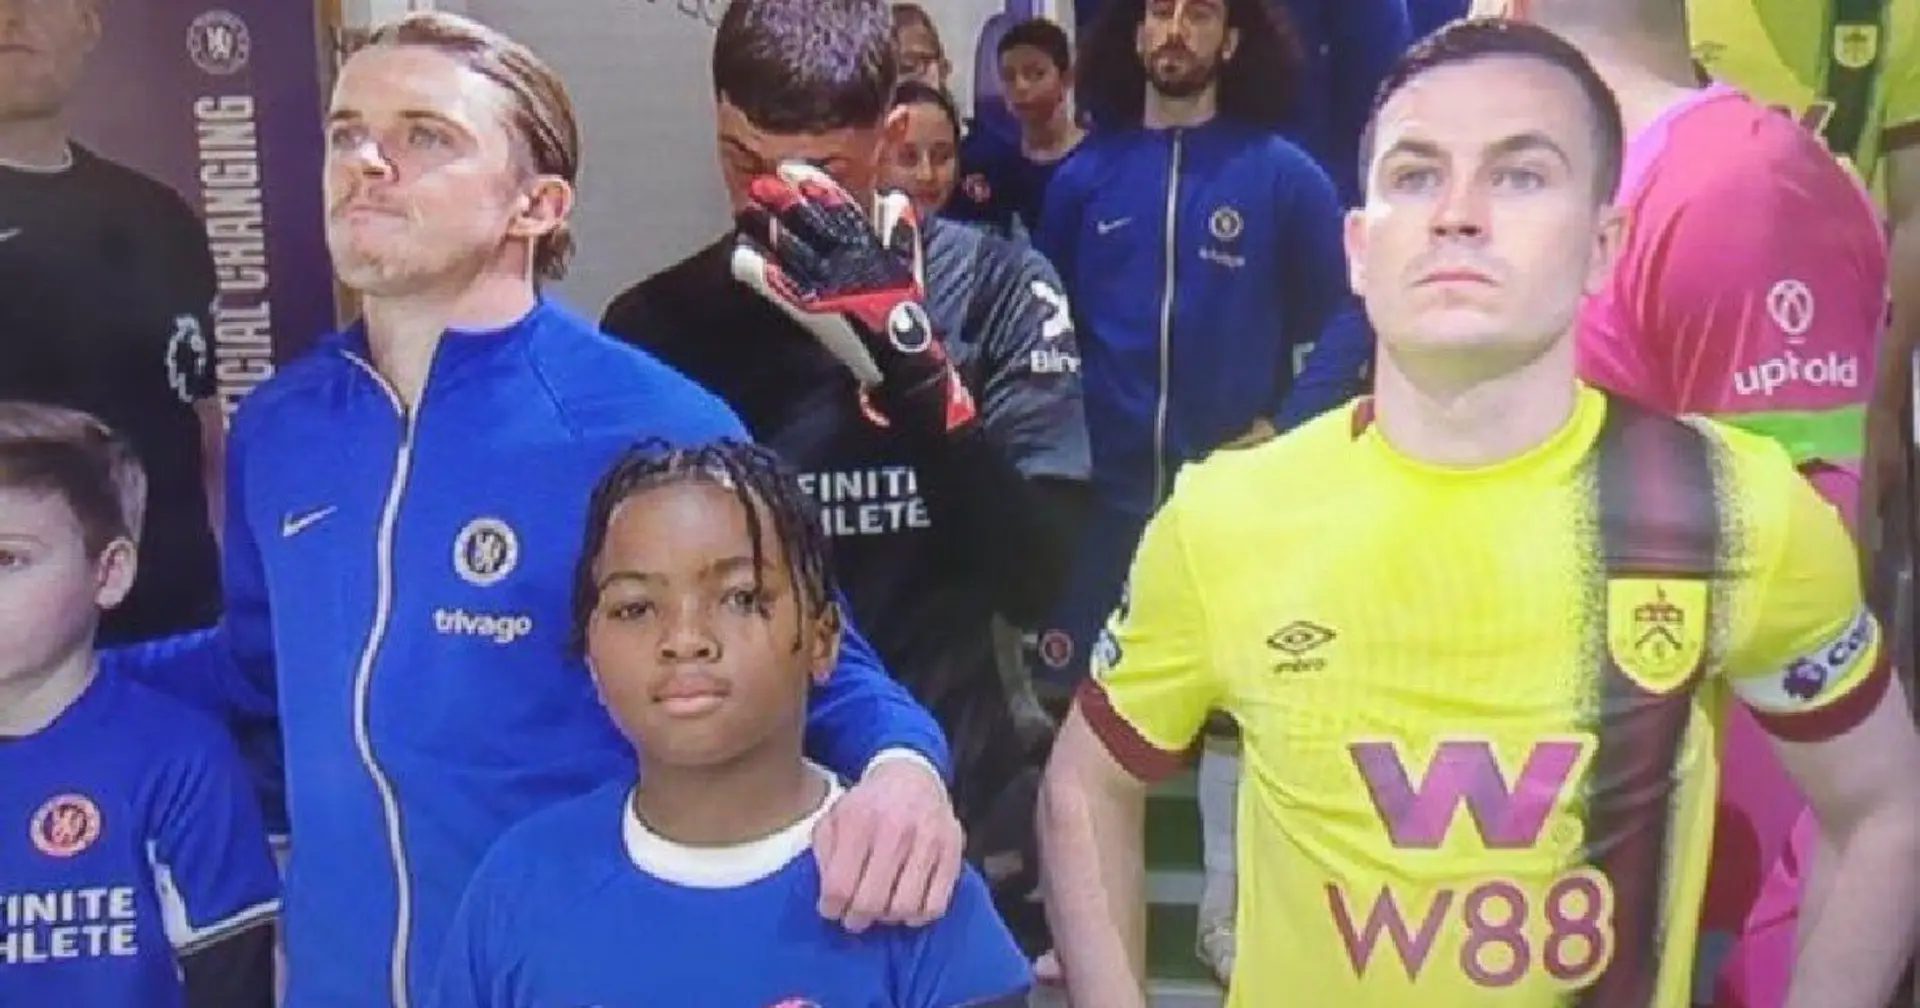 Chelsea star Conor Gallagher with the mascot in the tunnel ahead of kickoff against Burnley.